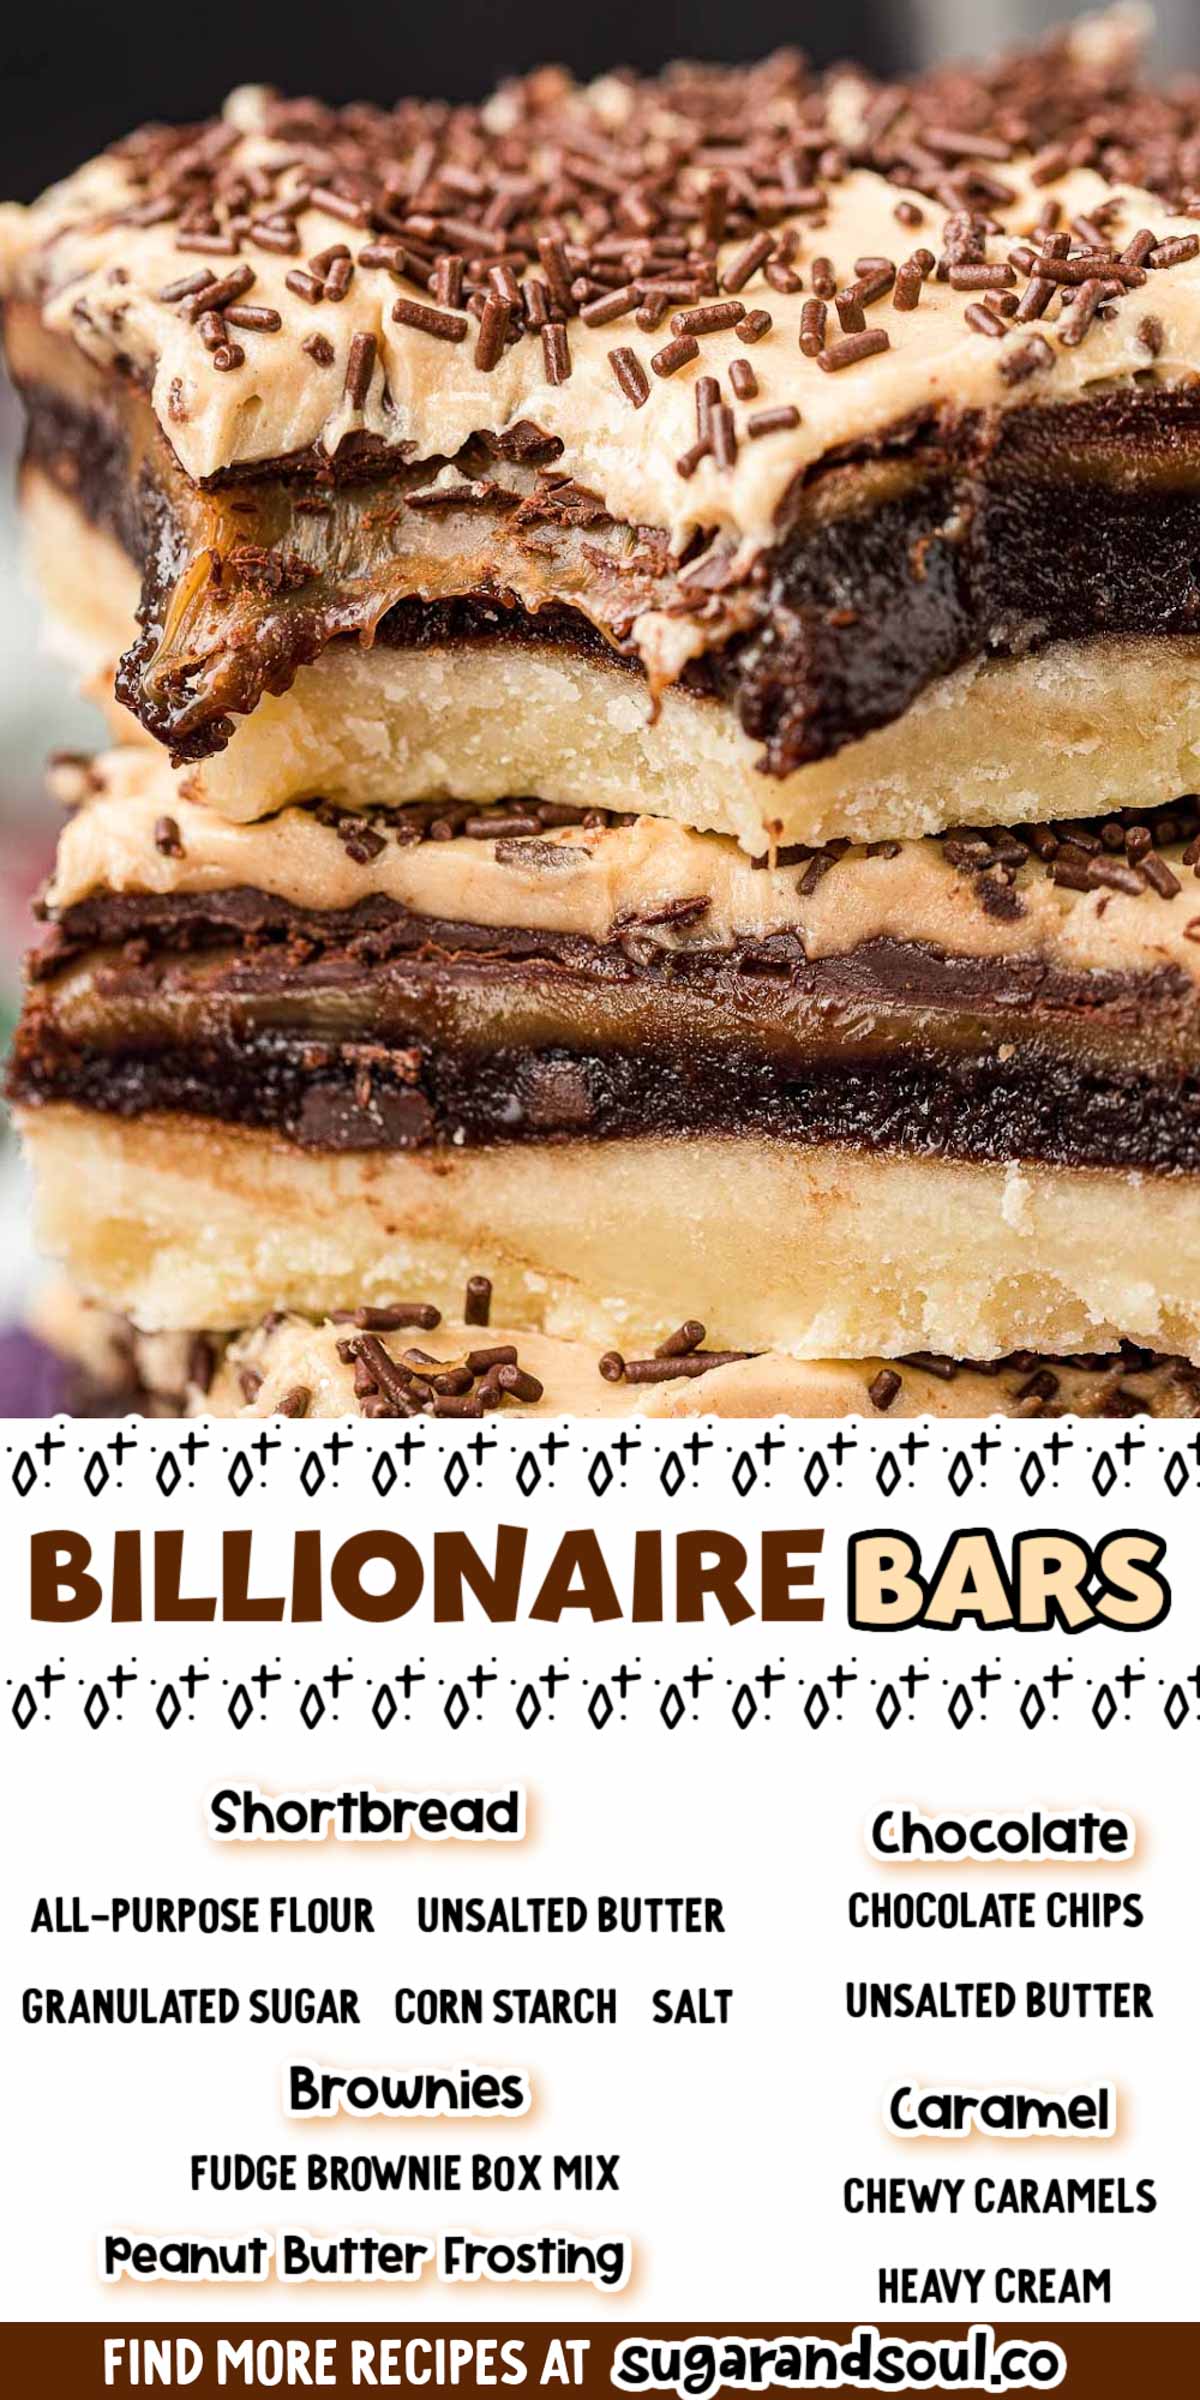 These Billionaire Bars are made with 5 glorious layers of RICH and DECADENT sugary favorites! Shortbread, brownie, caramel, chocolate, and peanut butter frosting combine for the ultimate dessert bar! Everyone will be begging you for the recipe! via @sugarandsoulco